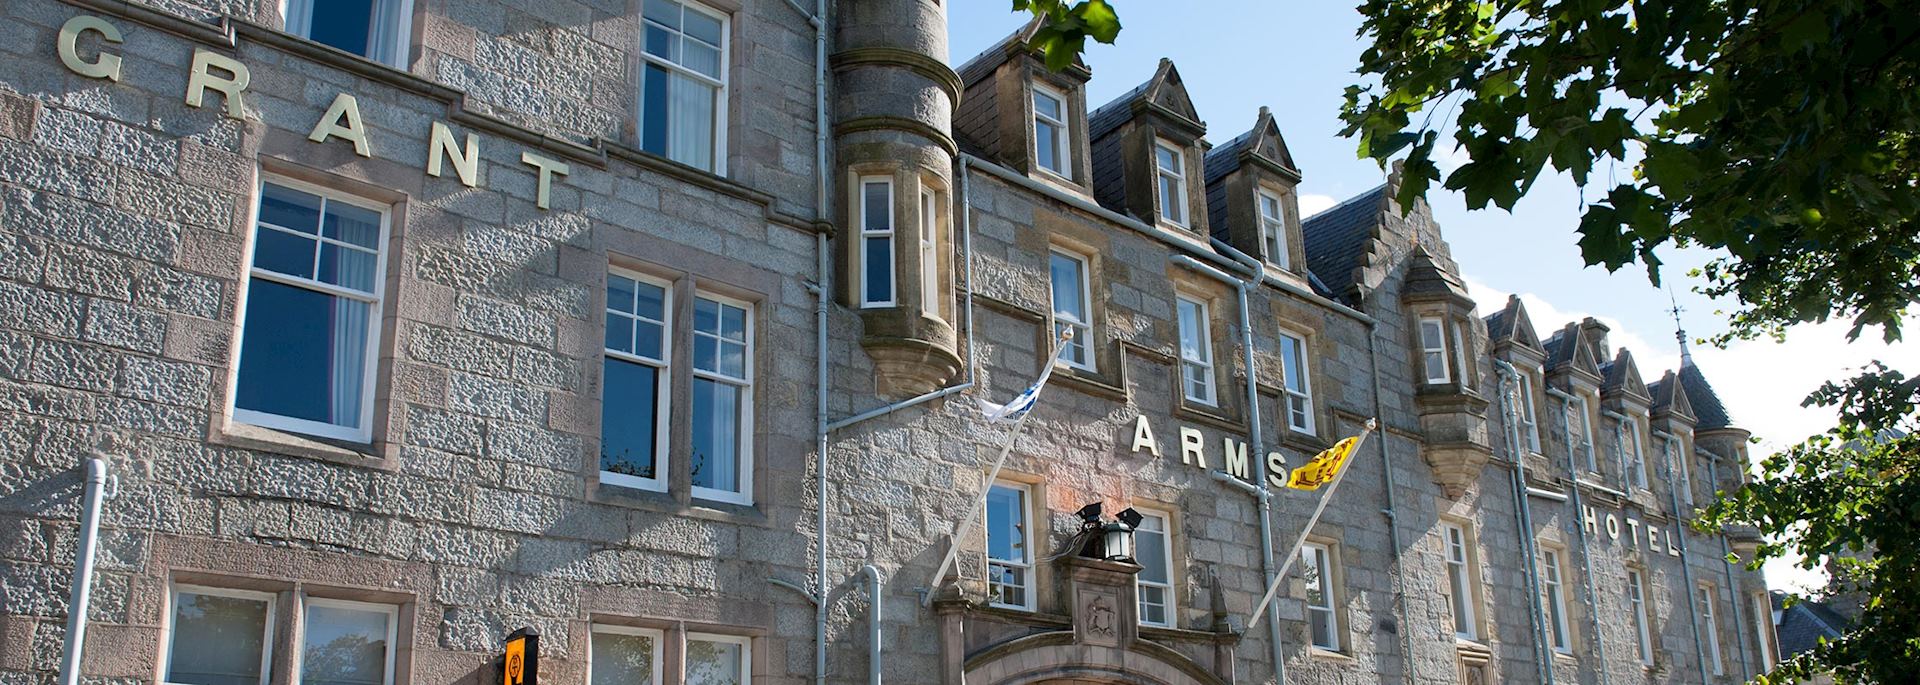 The Grant Arms Hotel, Grantown on Spey